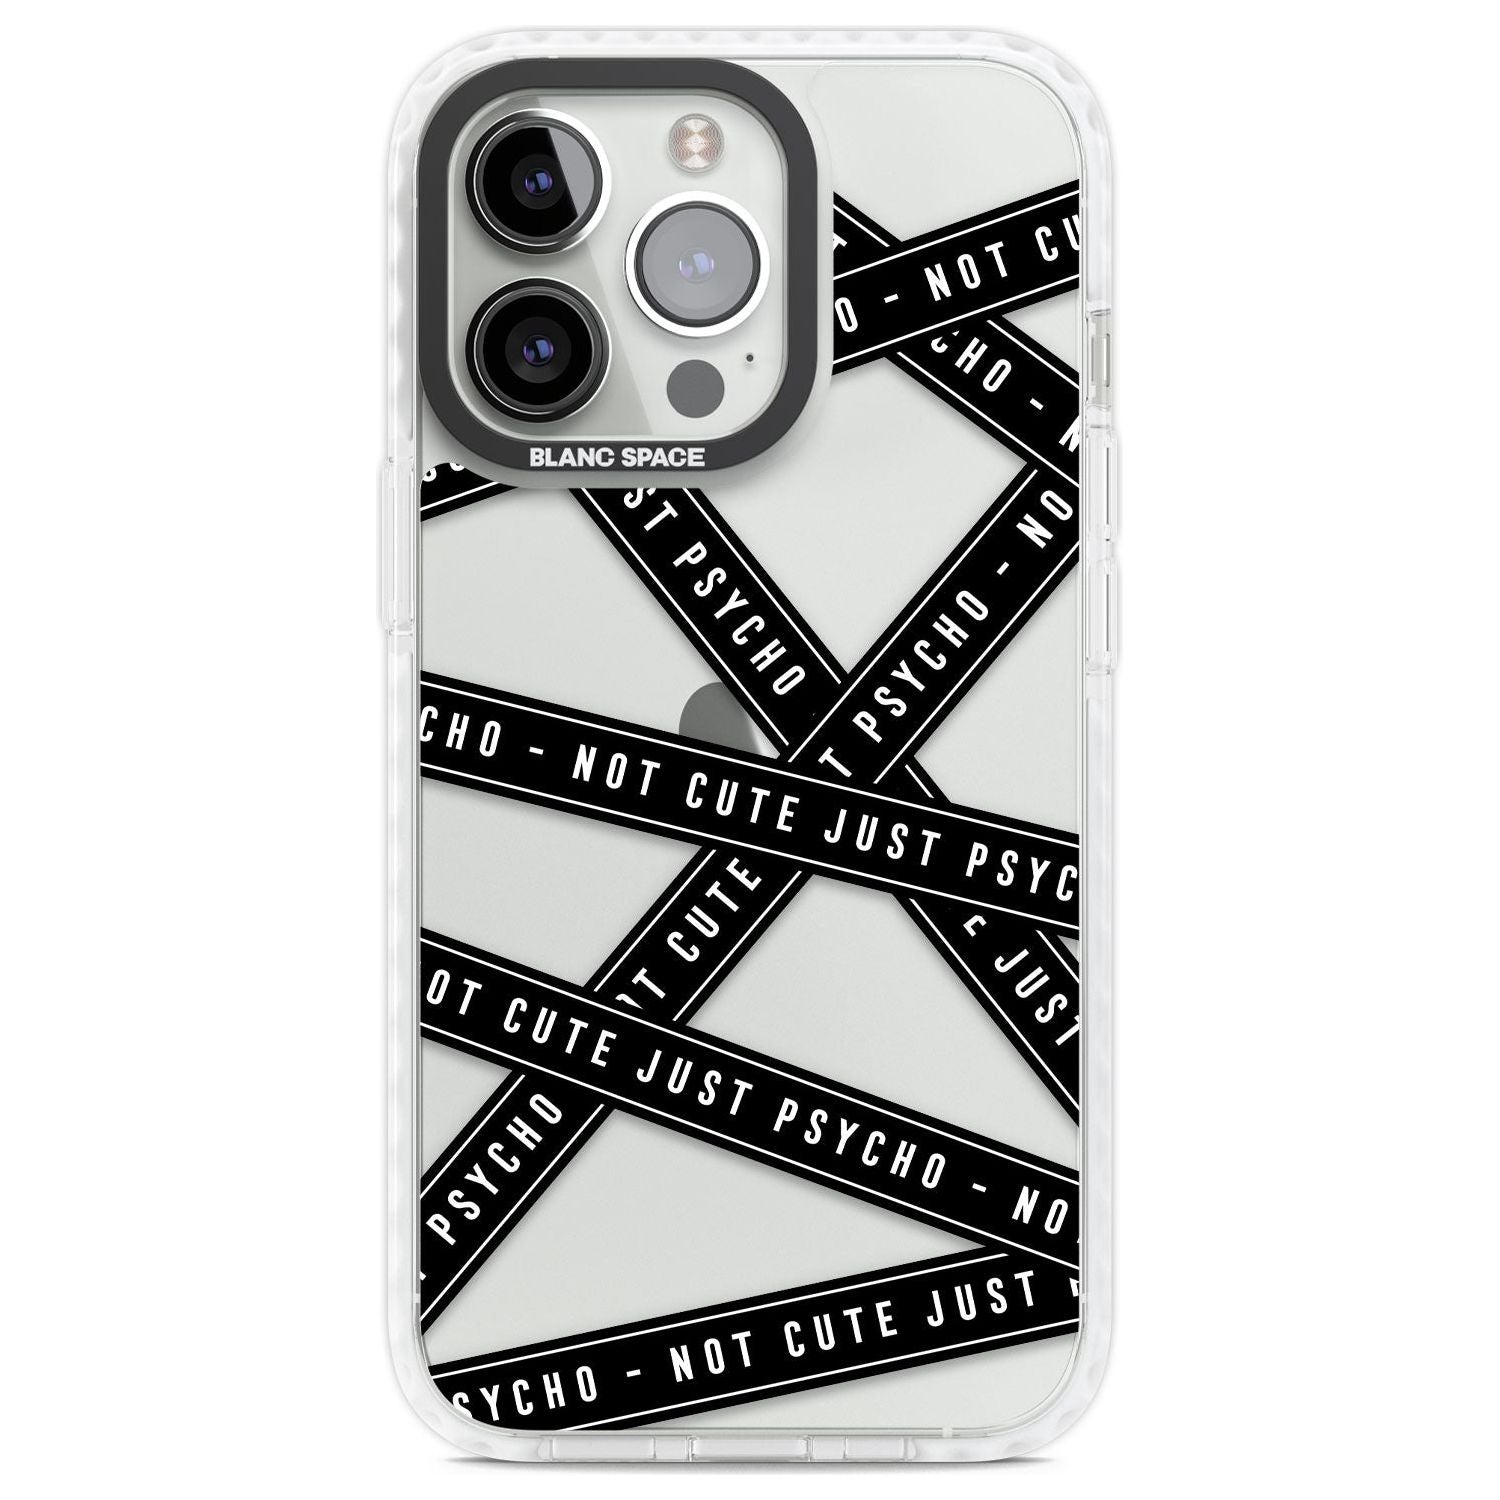 Caution Tape (Clear) Not Cute Just Psycho Phone Case iPhone 13 Pro / Impact Case,iPhone 14 Pro / Impact Case,iPhone 15 Pro Max / Impact Case,iPhone 15 Pro / Impact Case Blanc Space